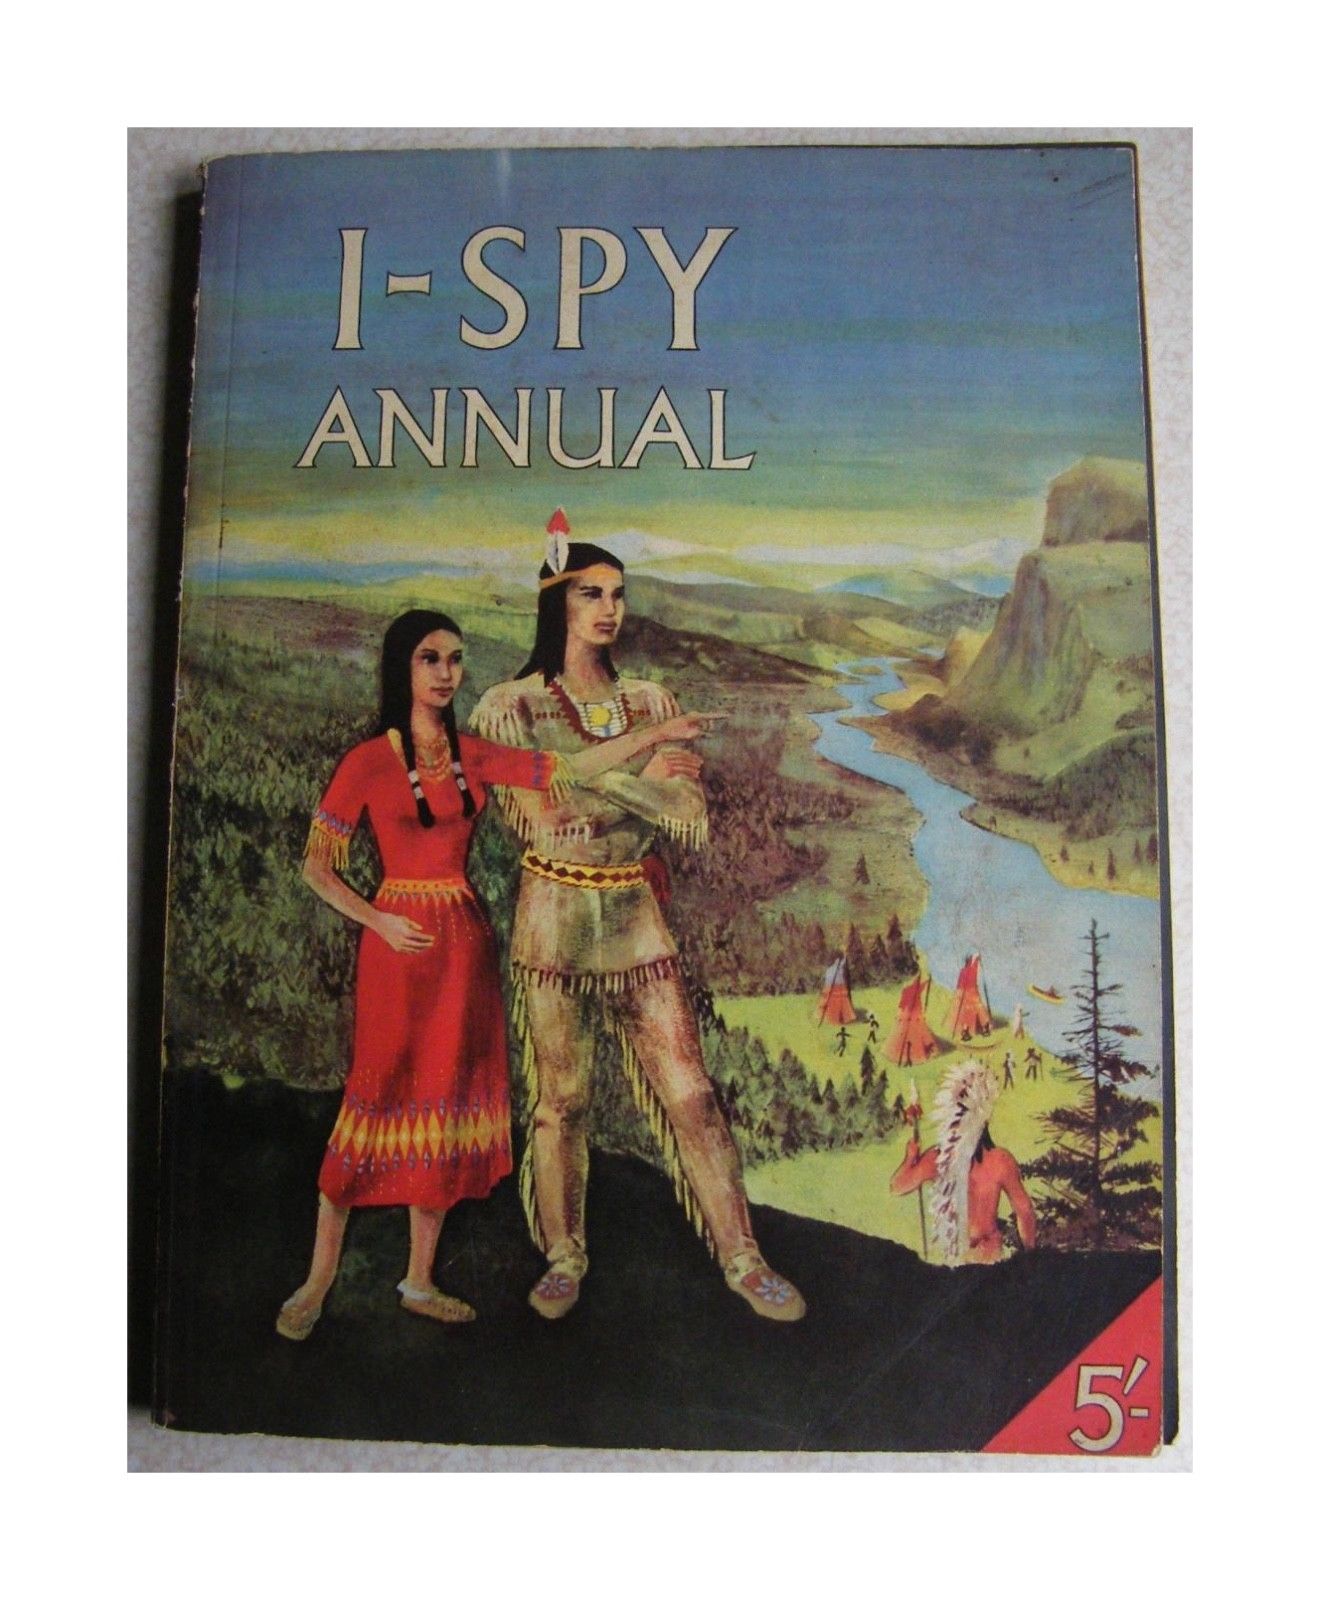 THE I-SPY ANNUAL 1954 (Paperback Annual Book) Used